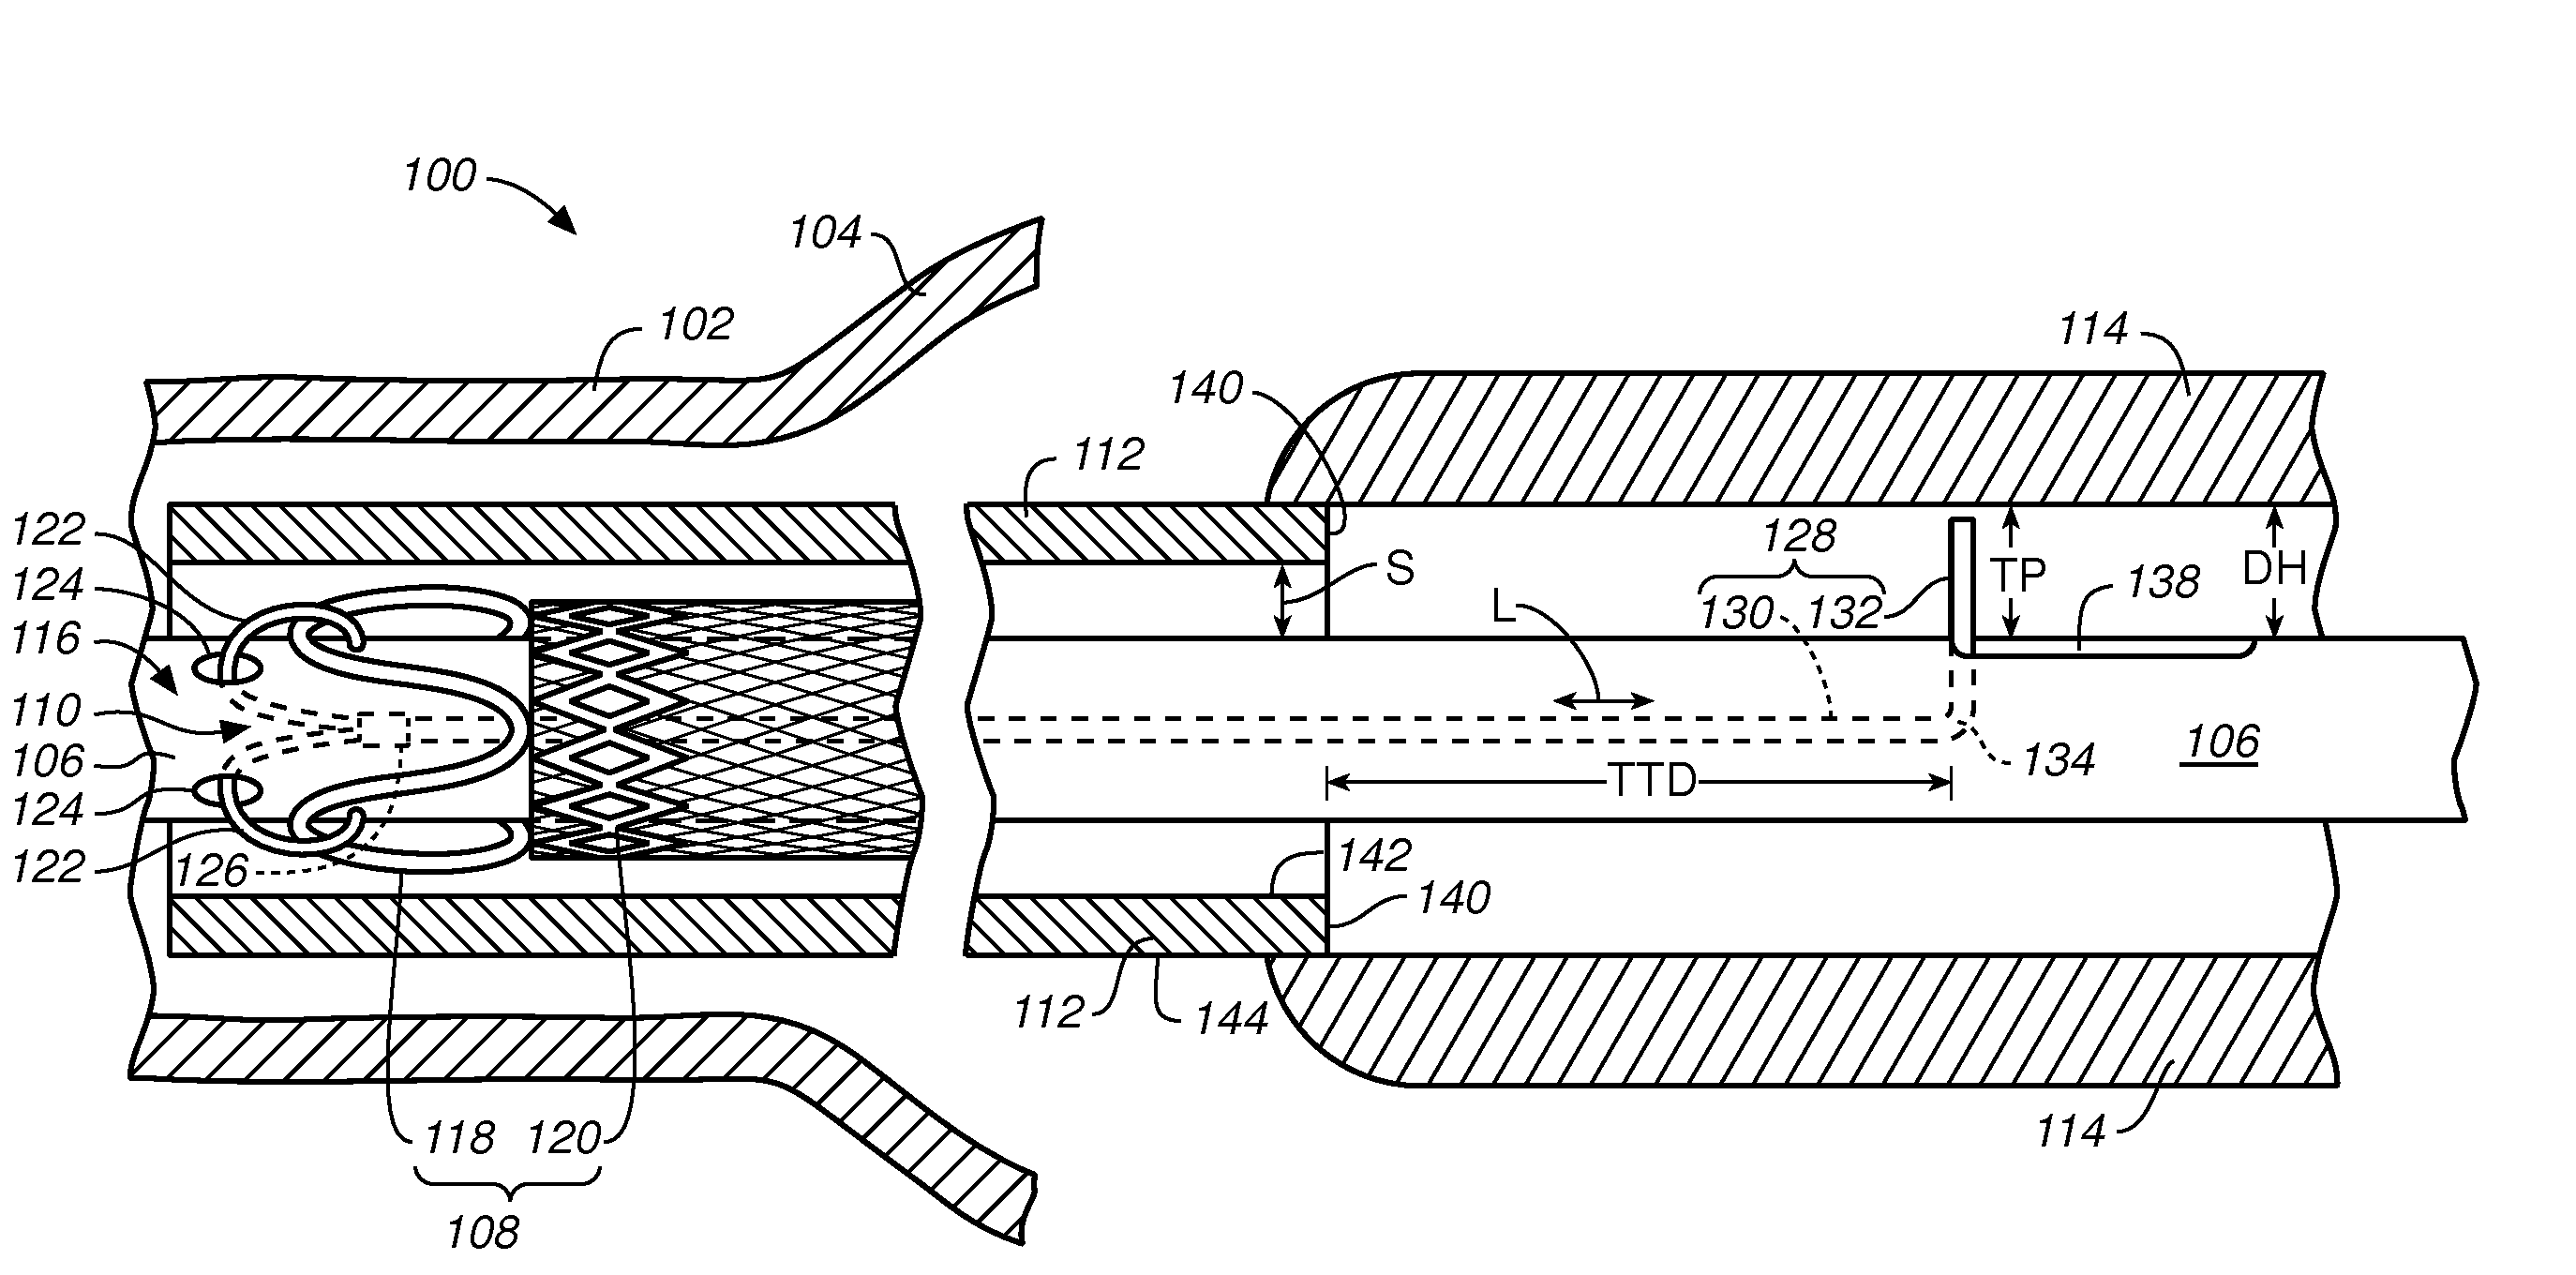 Stent-Graft Delivery System